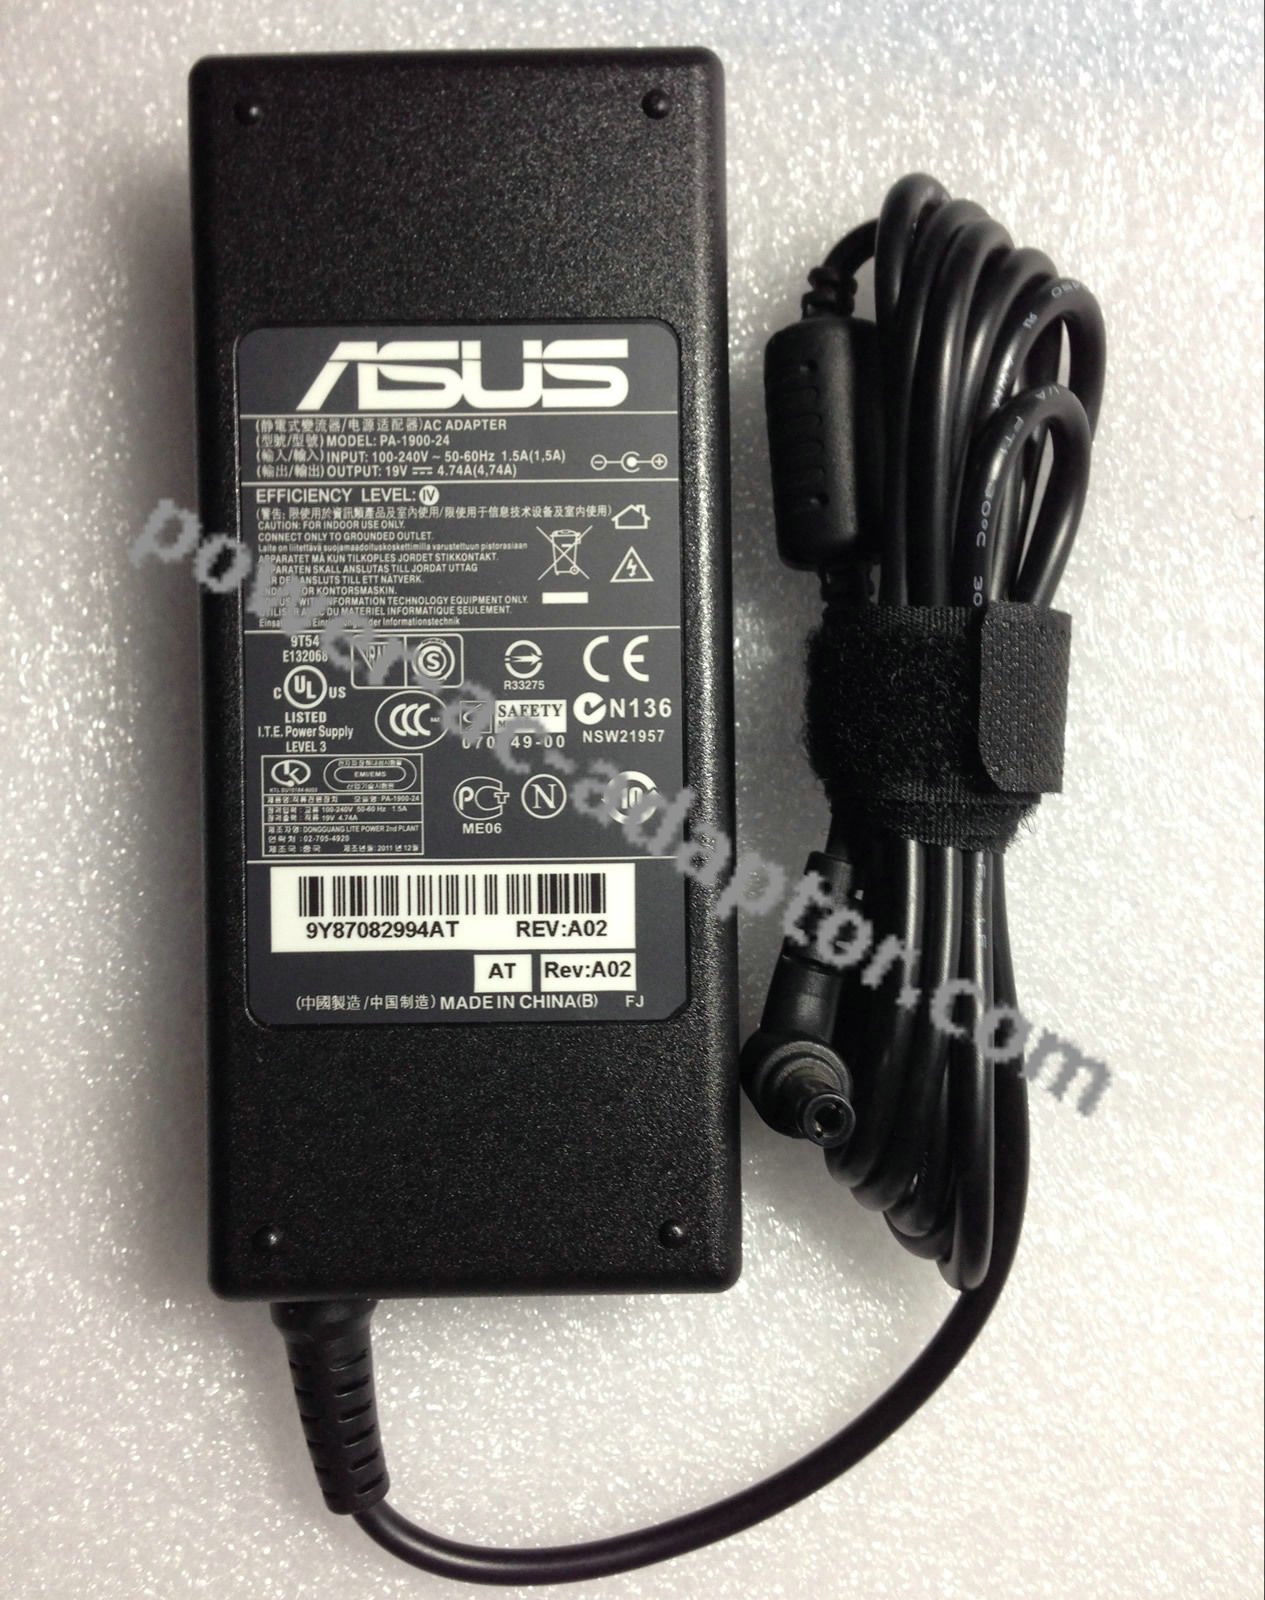 19V 90W AC Adapter Charger Cord for Asus F3 F5 F7 F8 Laptop